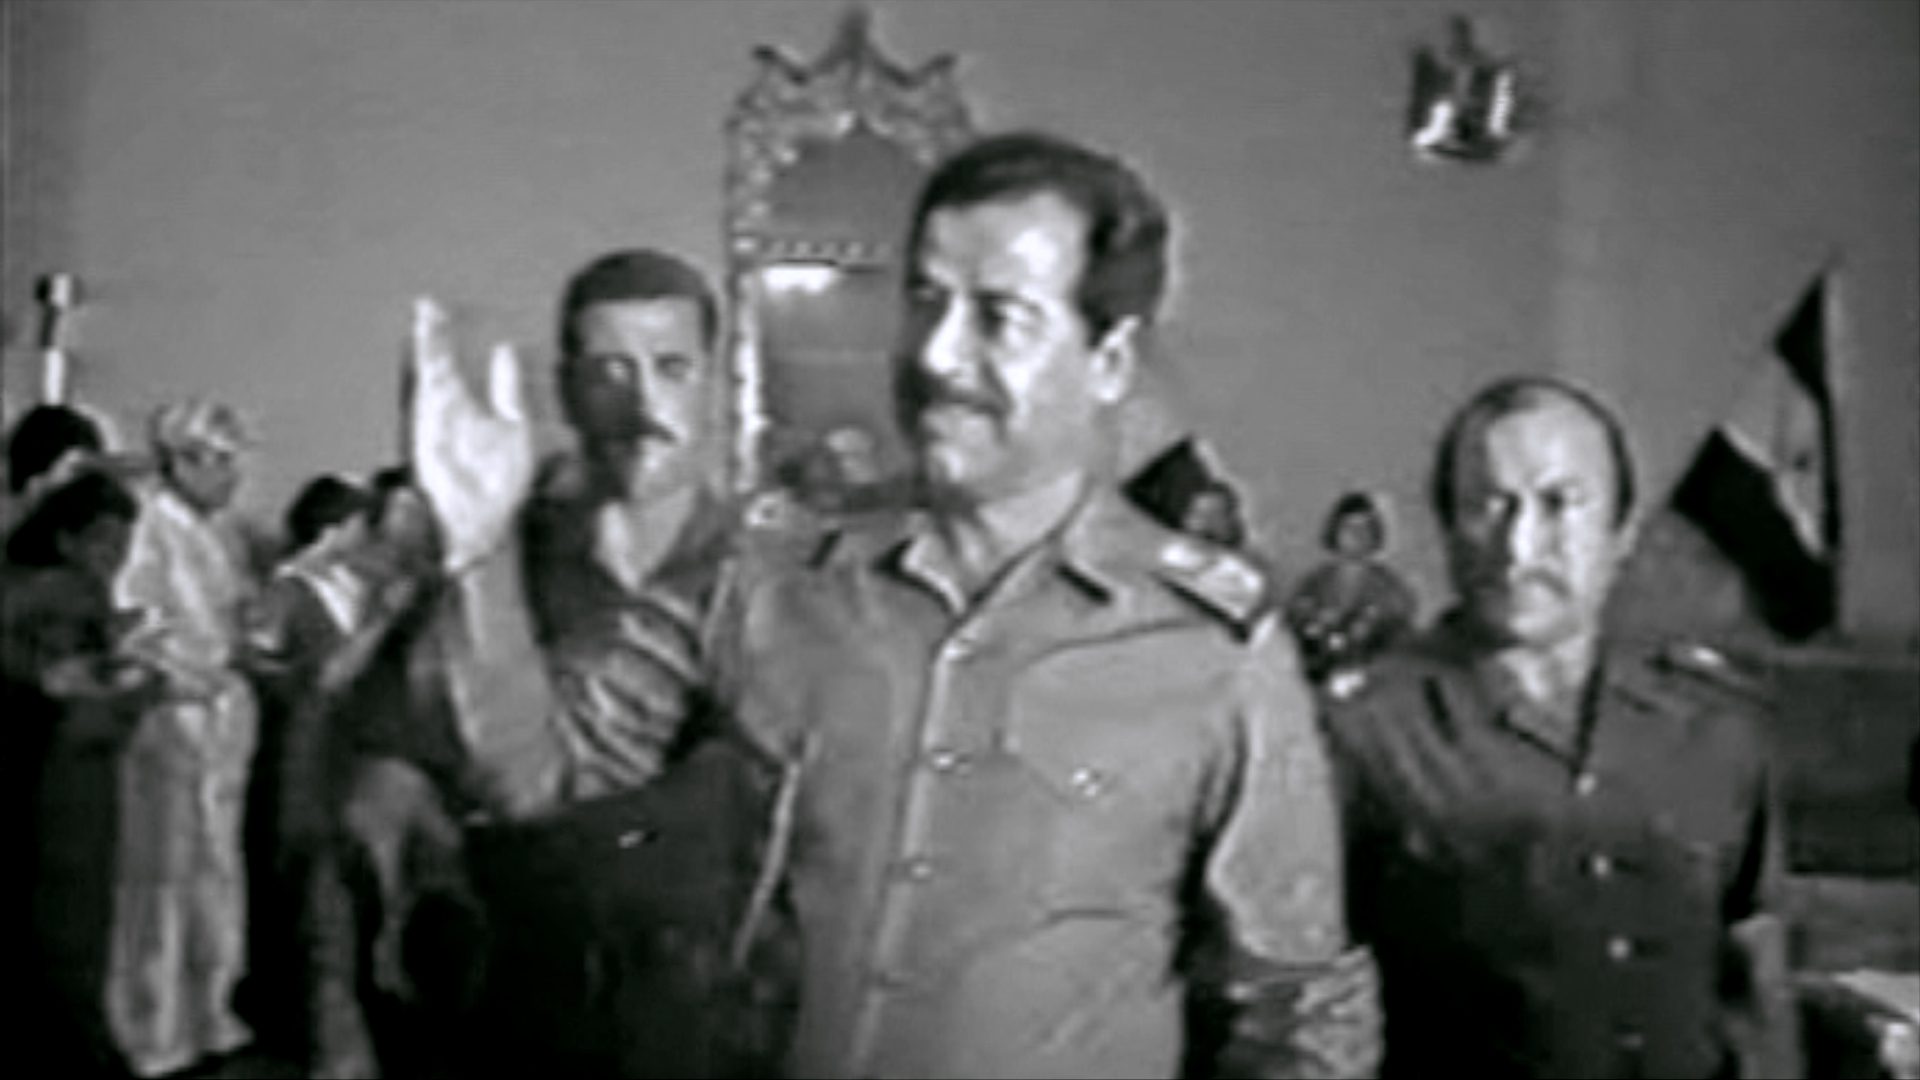 In late 1983, Saddam Hussein met Kurdish dignitaries in Erbil and suggested the missing 8,000 Barzanis, who had disappeared in July that year, had met a terrible end. The Barzanis were accused of having helped Iran in its war with Iraq. 